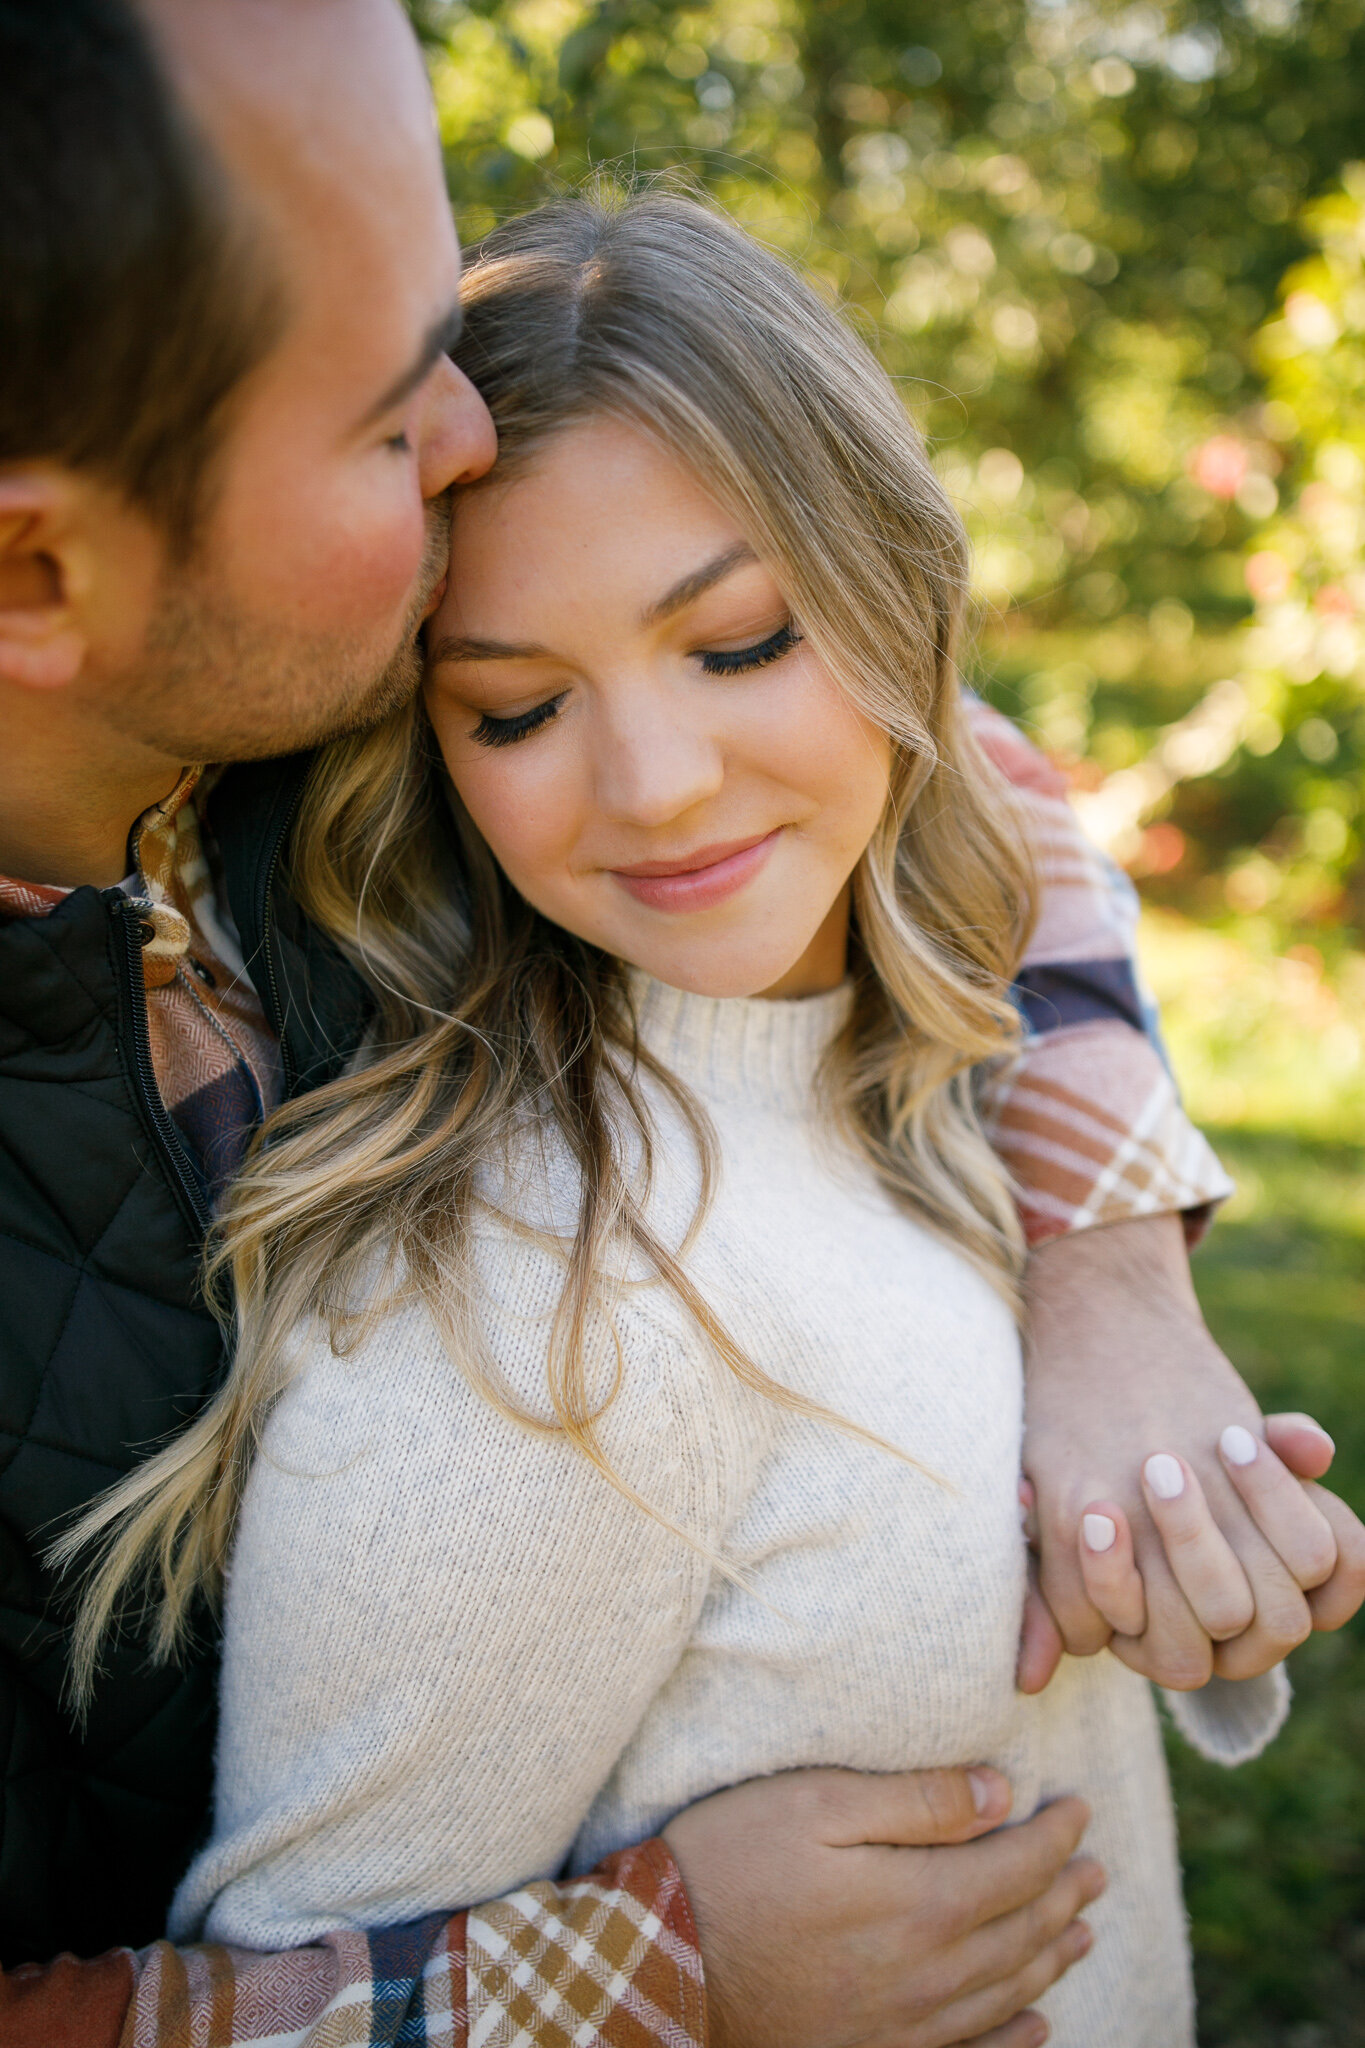 Libby and Alex Engaged Preview 2020 - Grand Rapids Wedding Photographer - J Darling Photo006.jpg